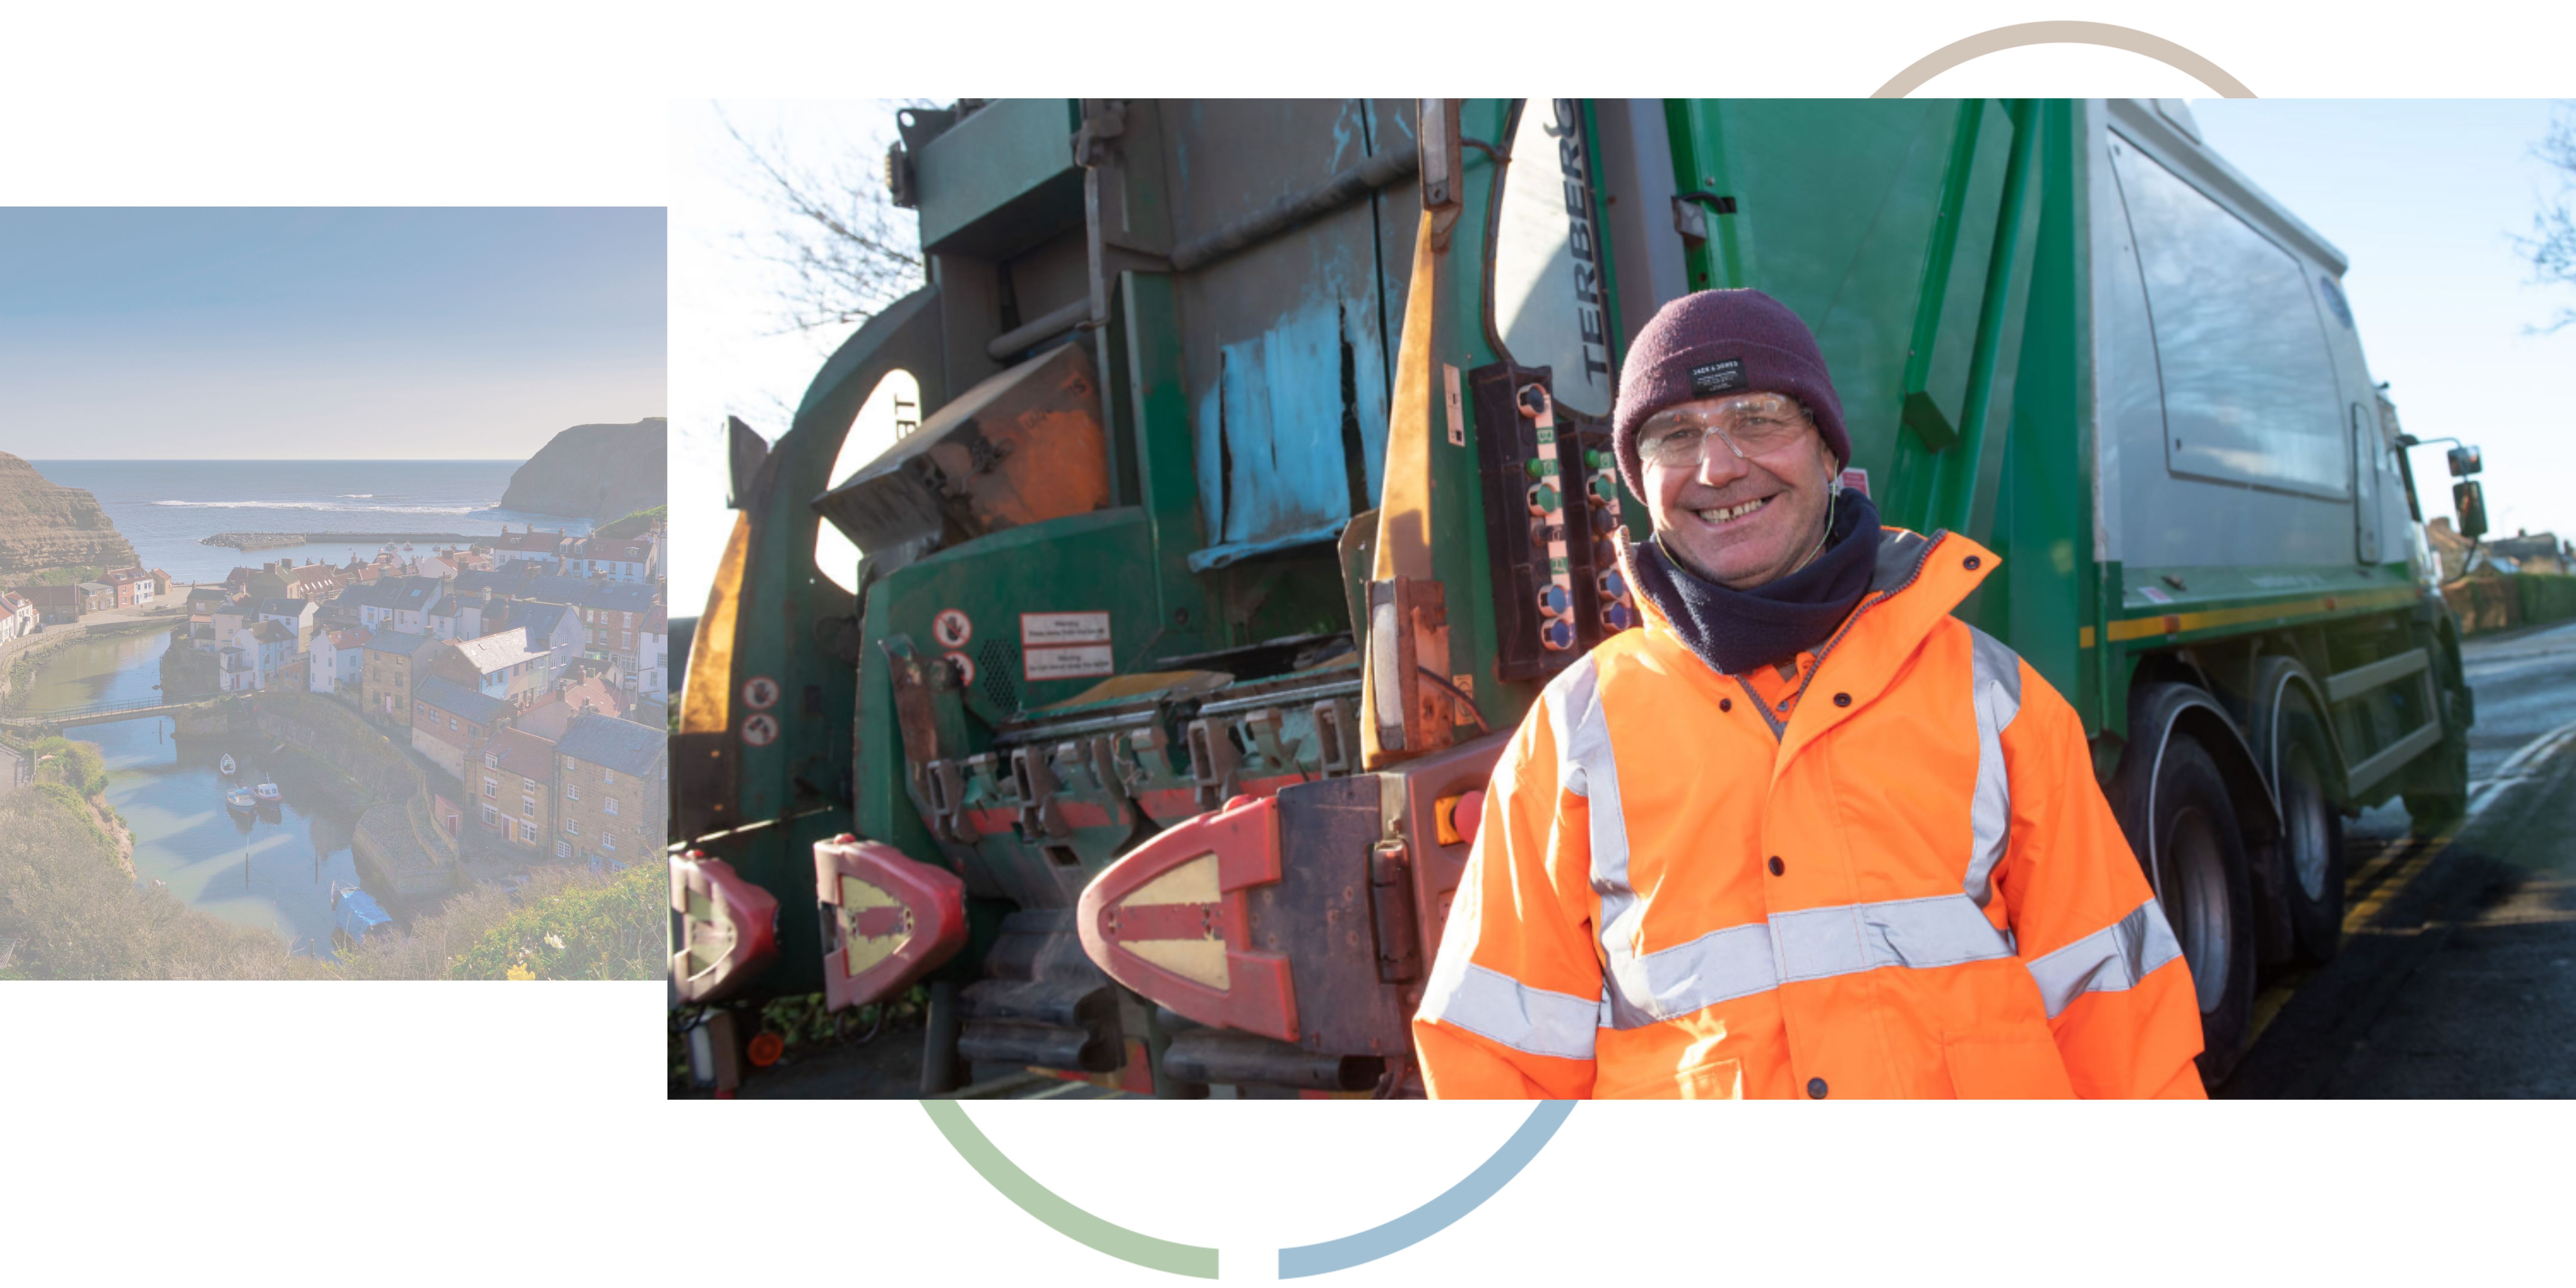 A photograph of the North Yorkshire coast next to a photograph of a man in a high visibility jacket smiling in front of a waste collection vehicle. 